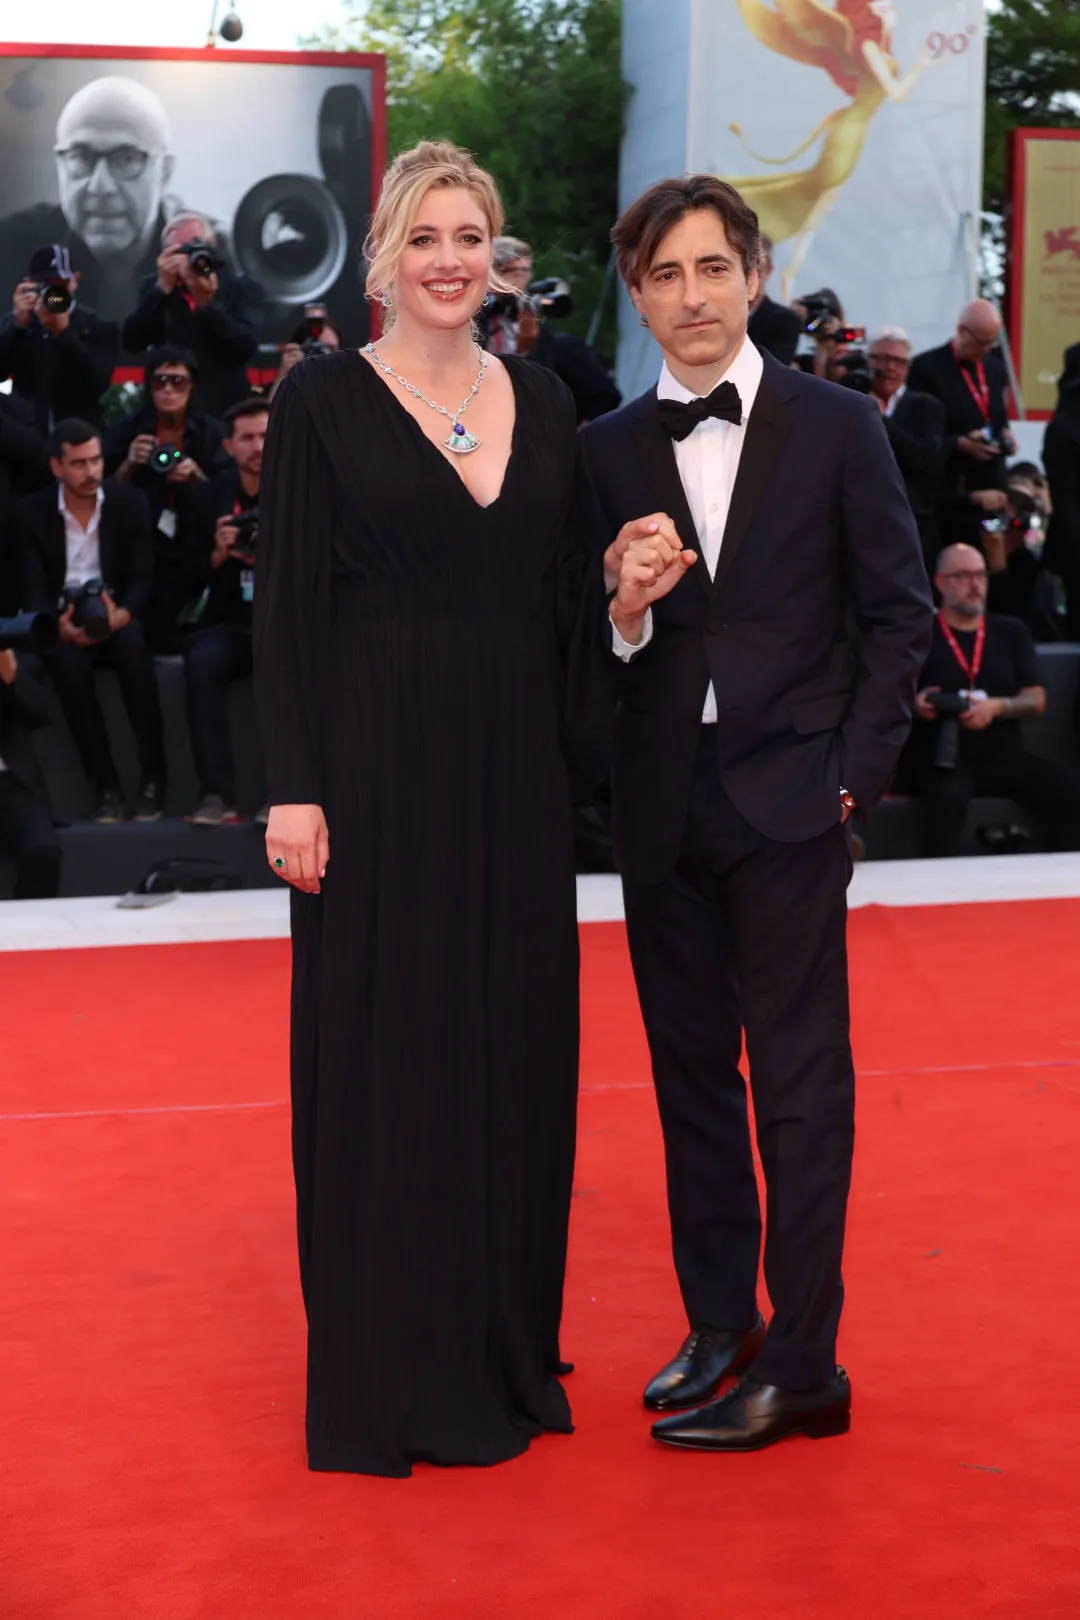 greta-gerwig-and-noah-baumbach-at-the-opening-red-carpet-of-the-79th-venice-international-film-festival-1